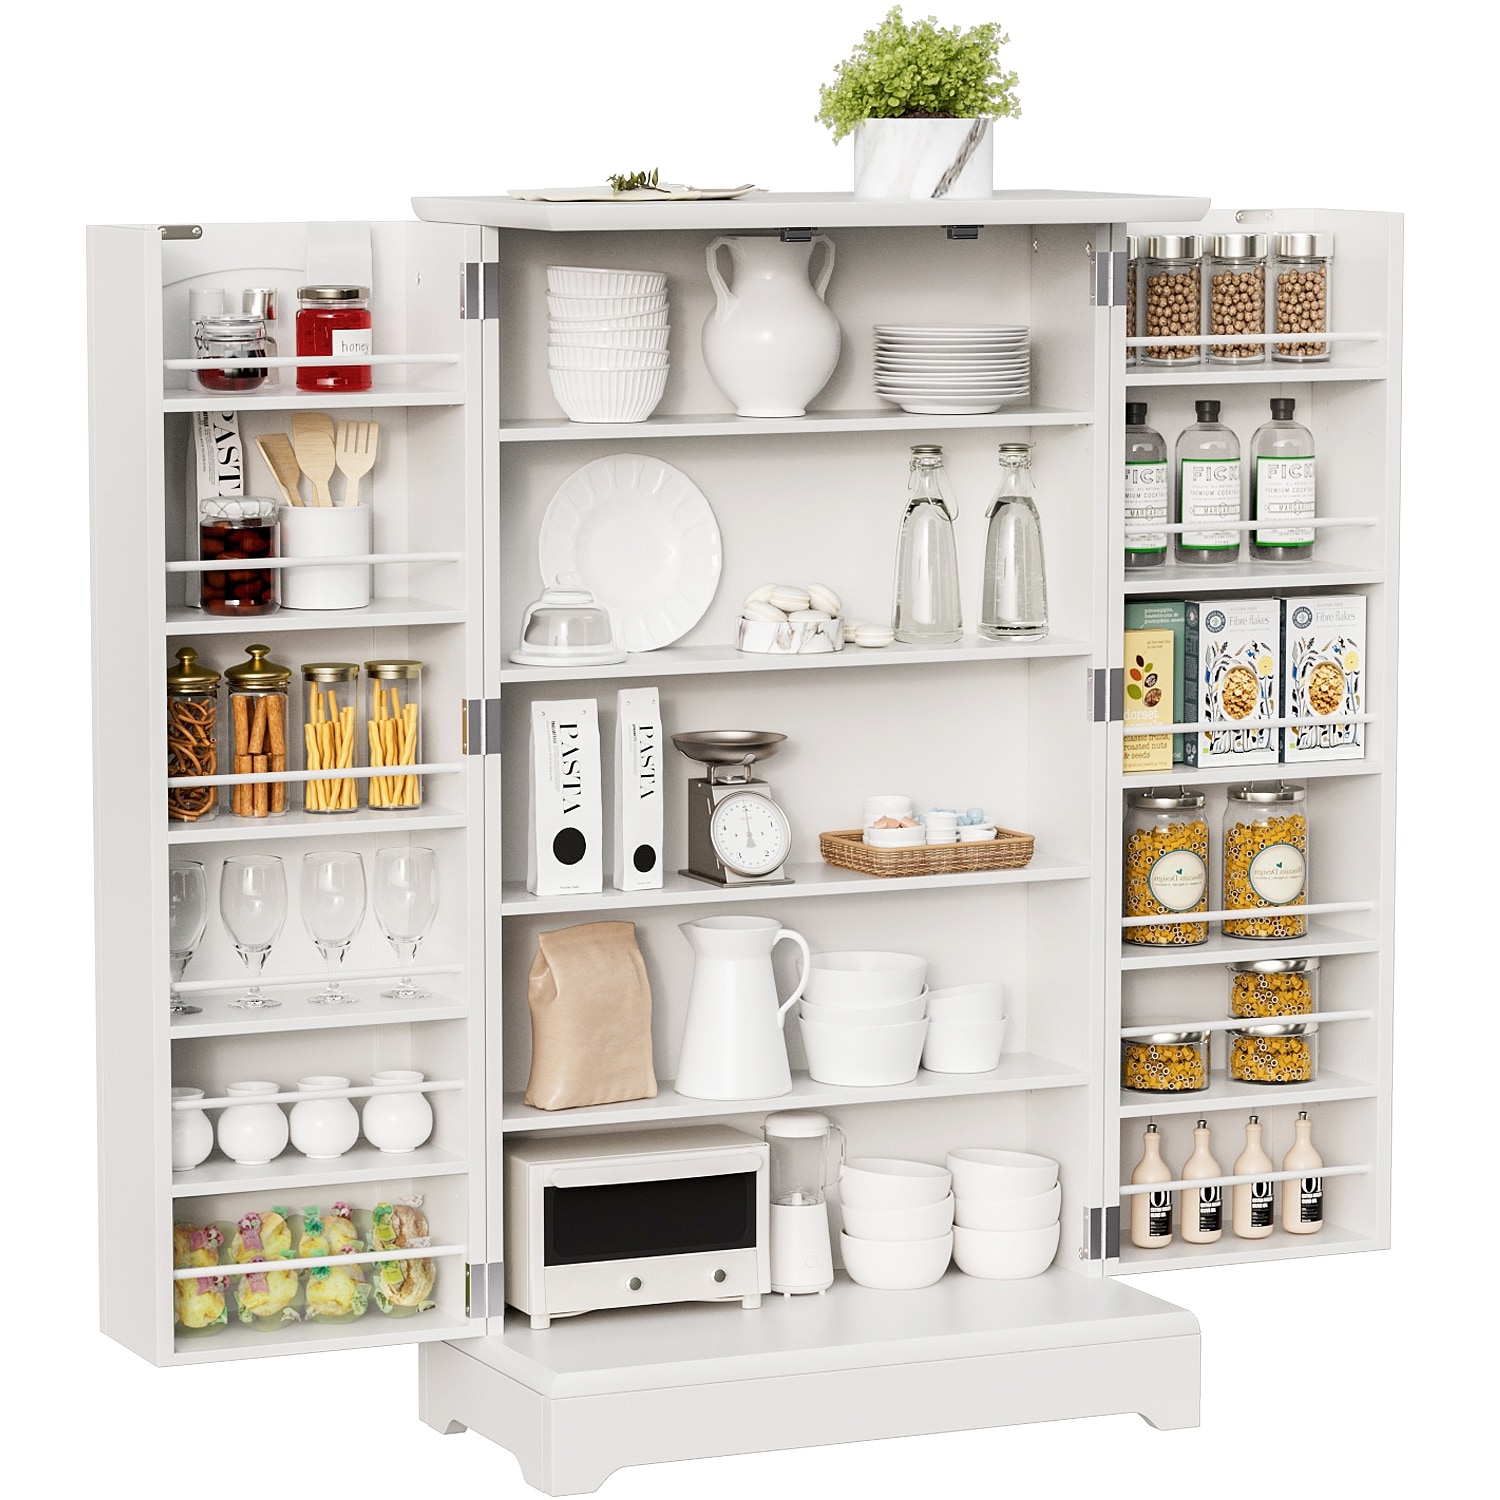 https://ak1.ostkcdn.com/images/products/is/images/direct/267bdb740d640a5c33223429d6ee72875cf46379/Furniwell-Kitchen-Pantry-Storage-Cabinet-with-Two-Doors%2C-White.jpg